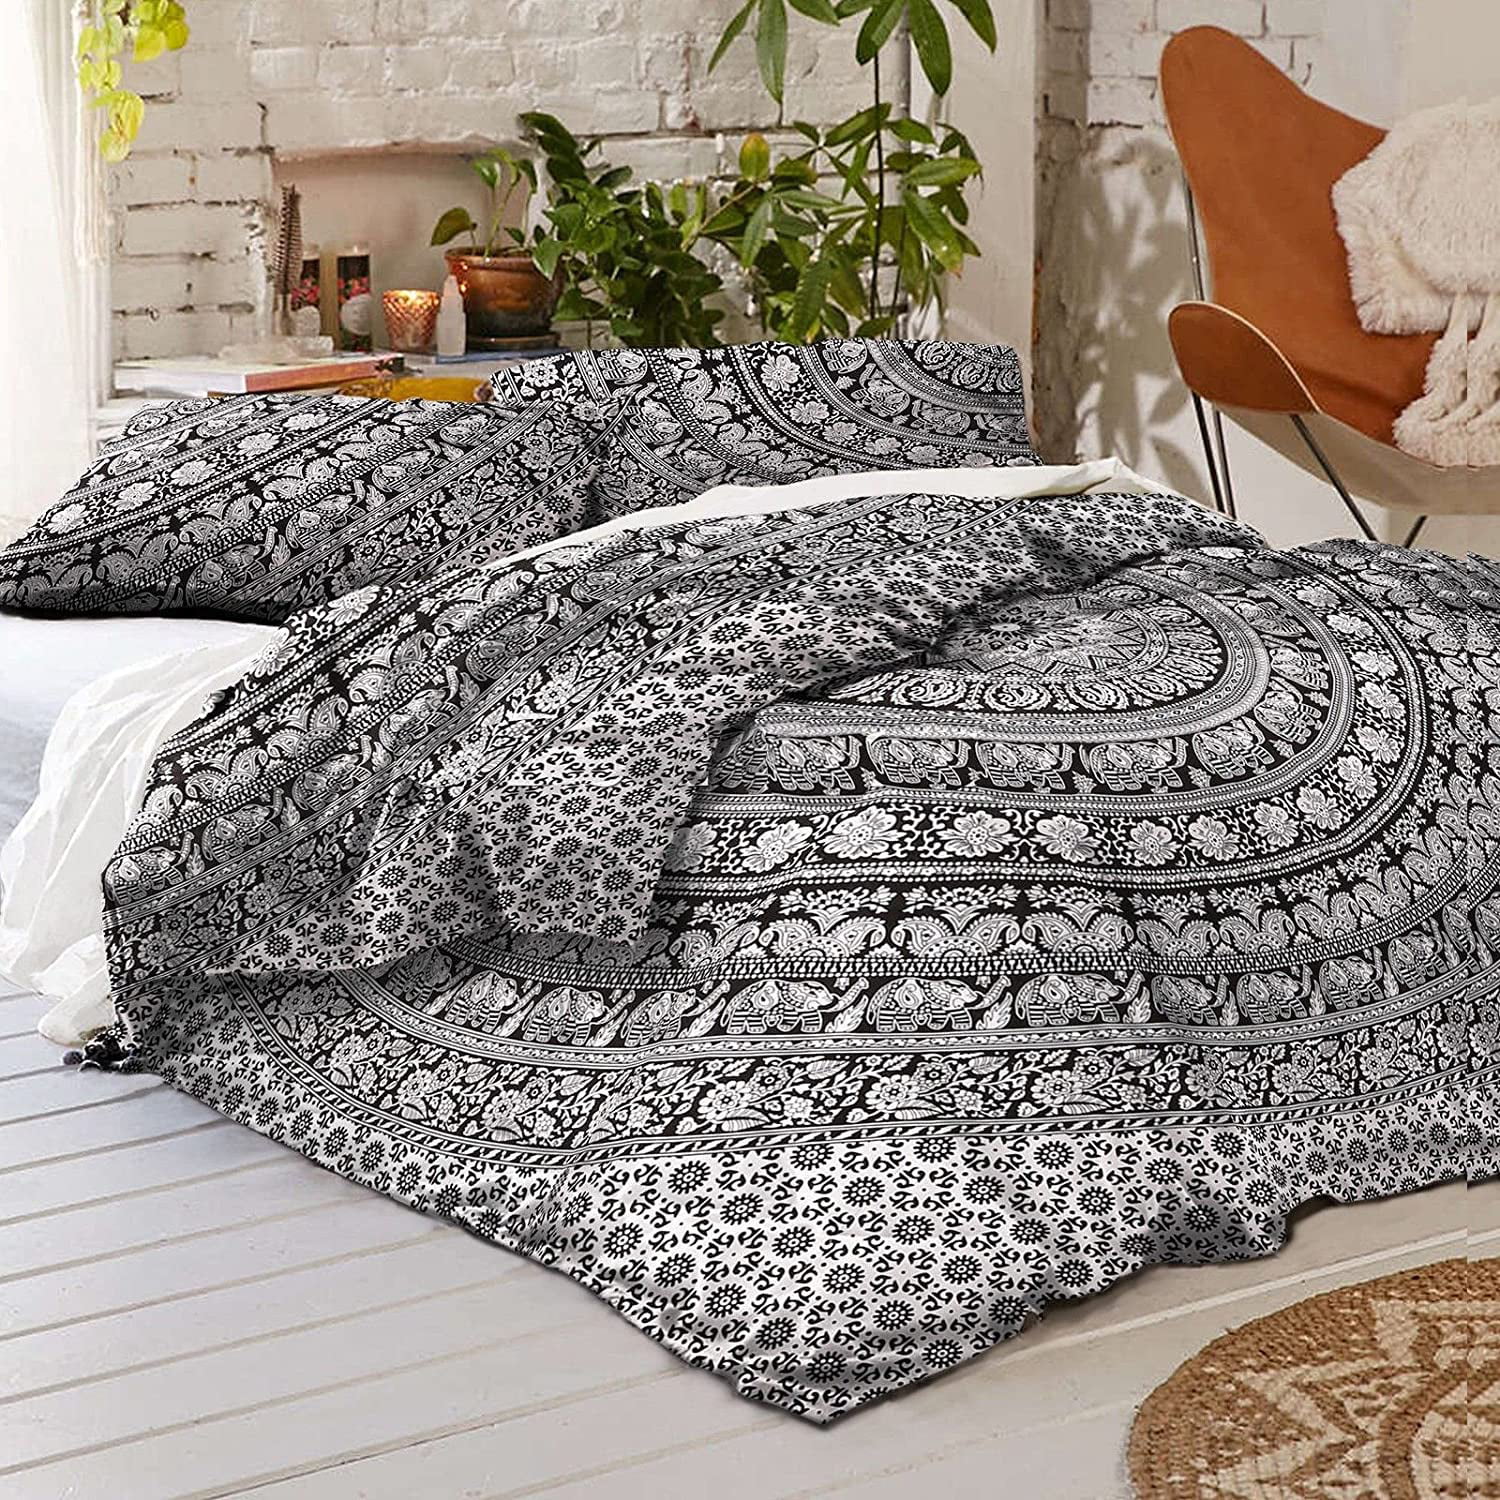 White Color ndian Bohemian Mandala Duvet King Size Decorative Bedding Doona Cover Reversible Cotton Quilt Cover Set With Pillow Cover